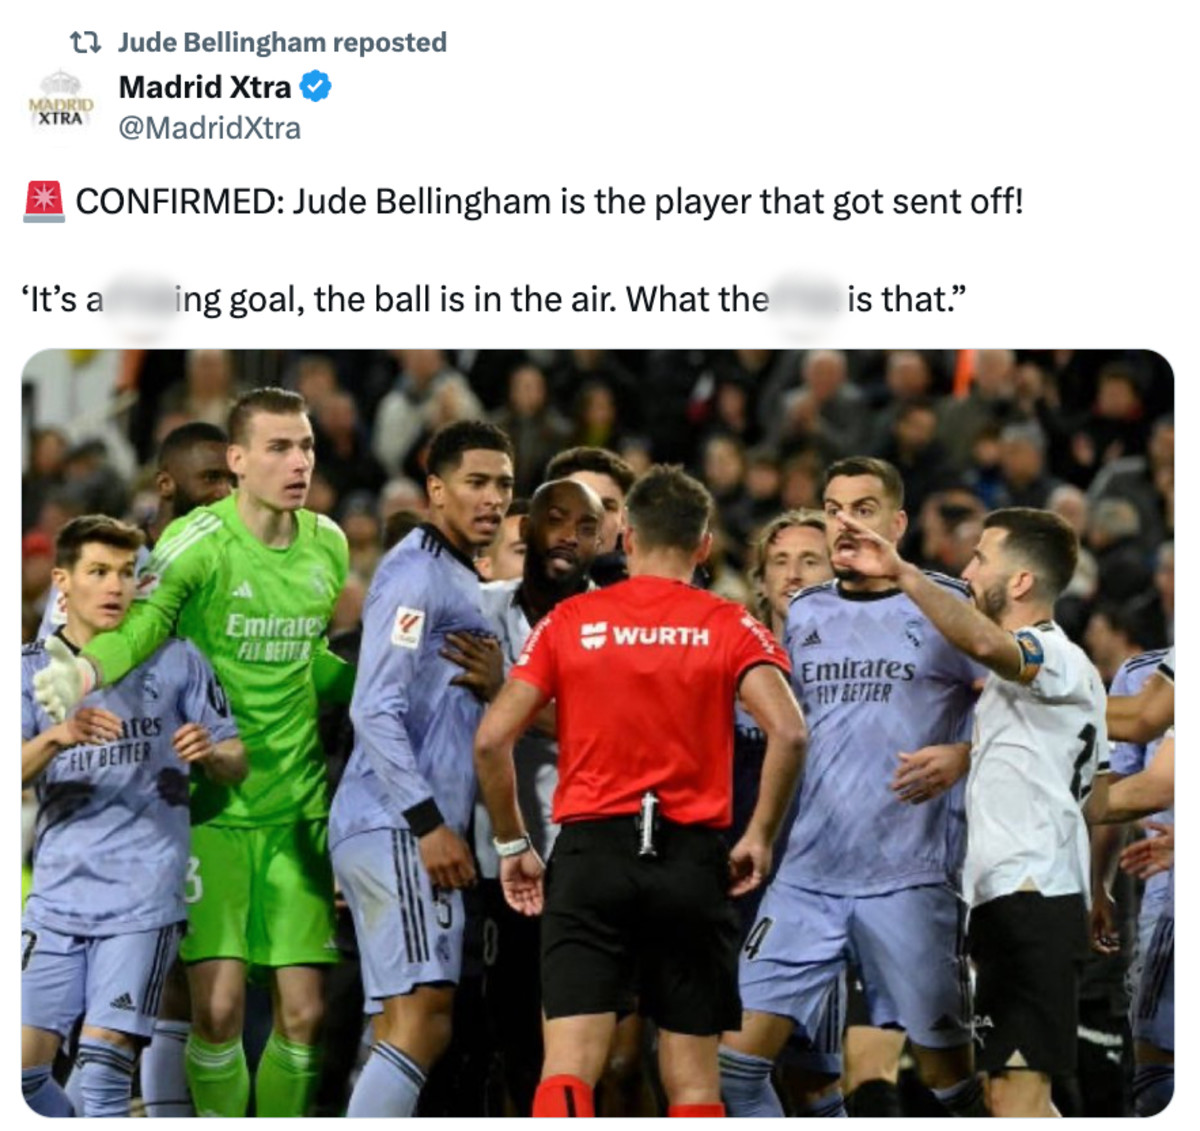 A tweet reposted by Jude Bellingham following Real Madrid's 2-2 draw at Valencia in March 2024